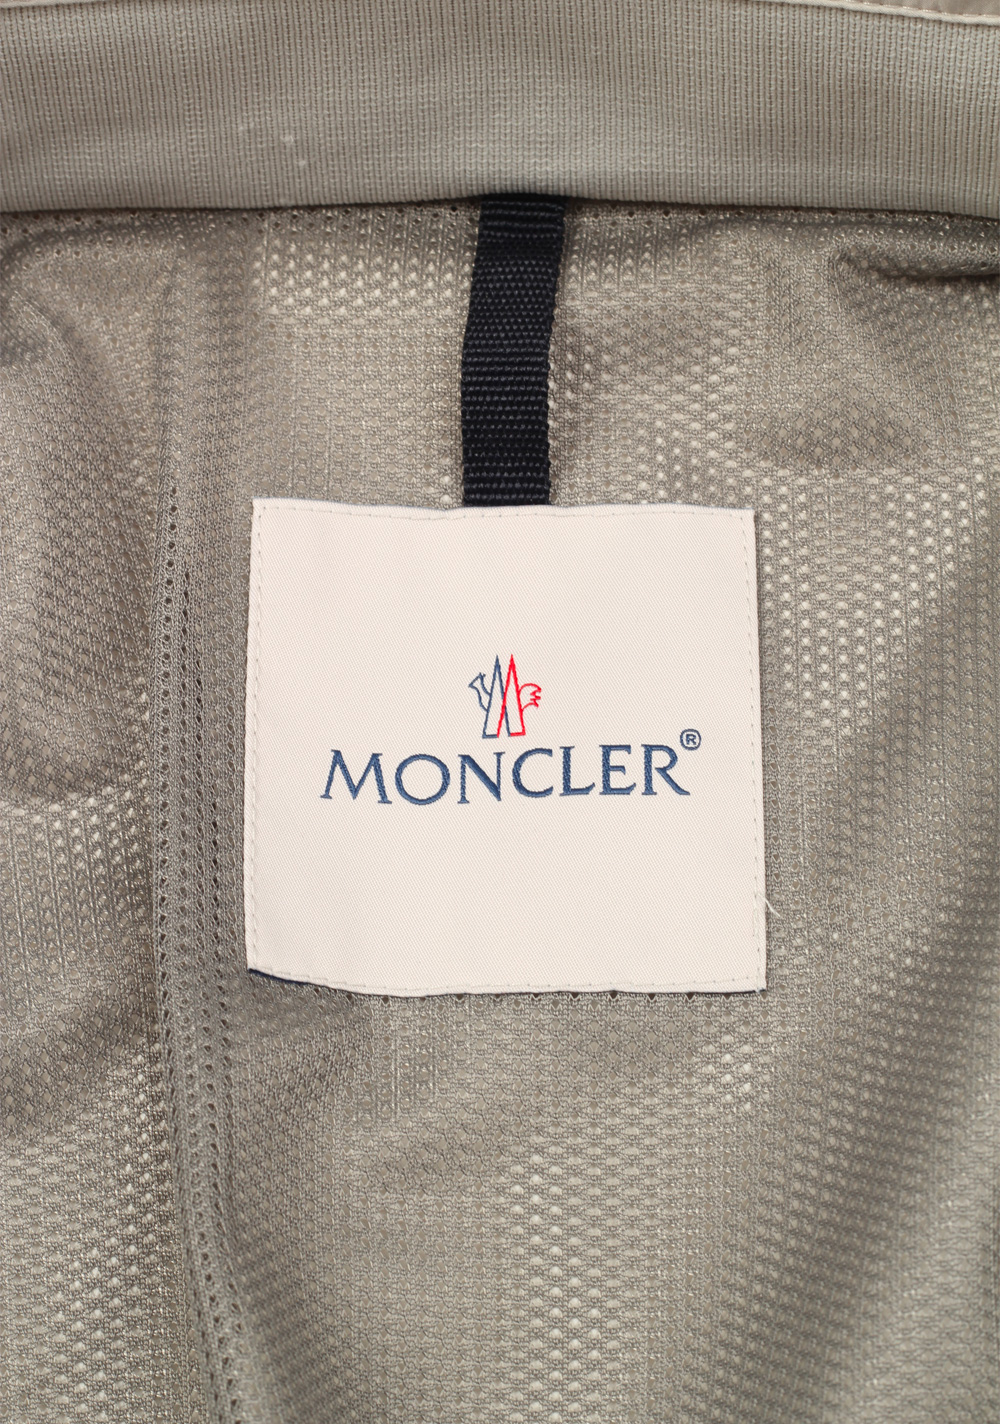 moncler size 4 in us